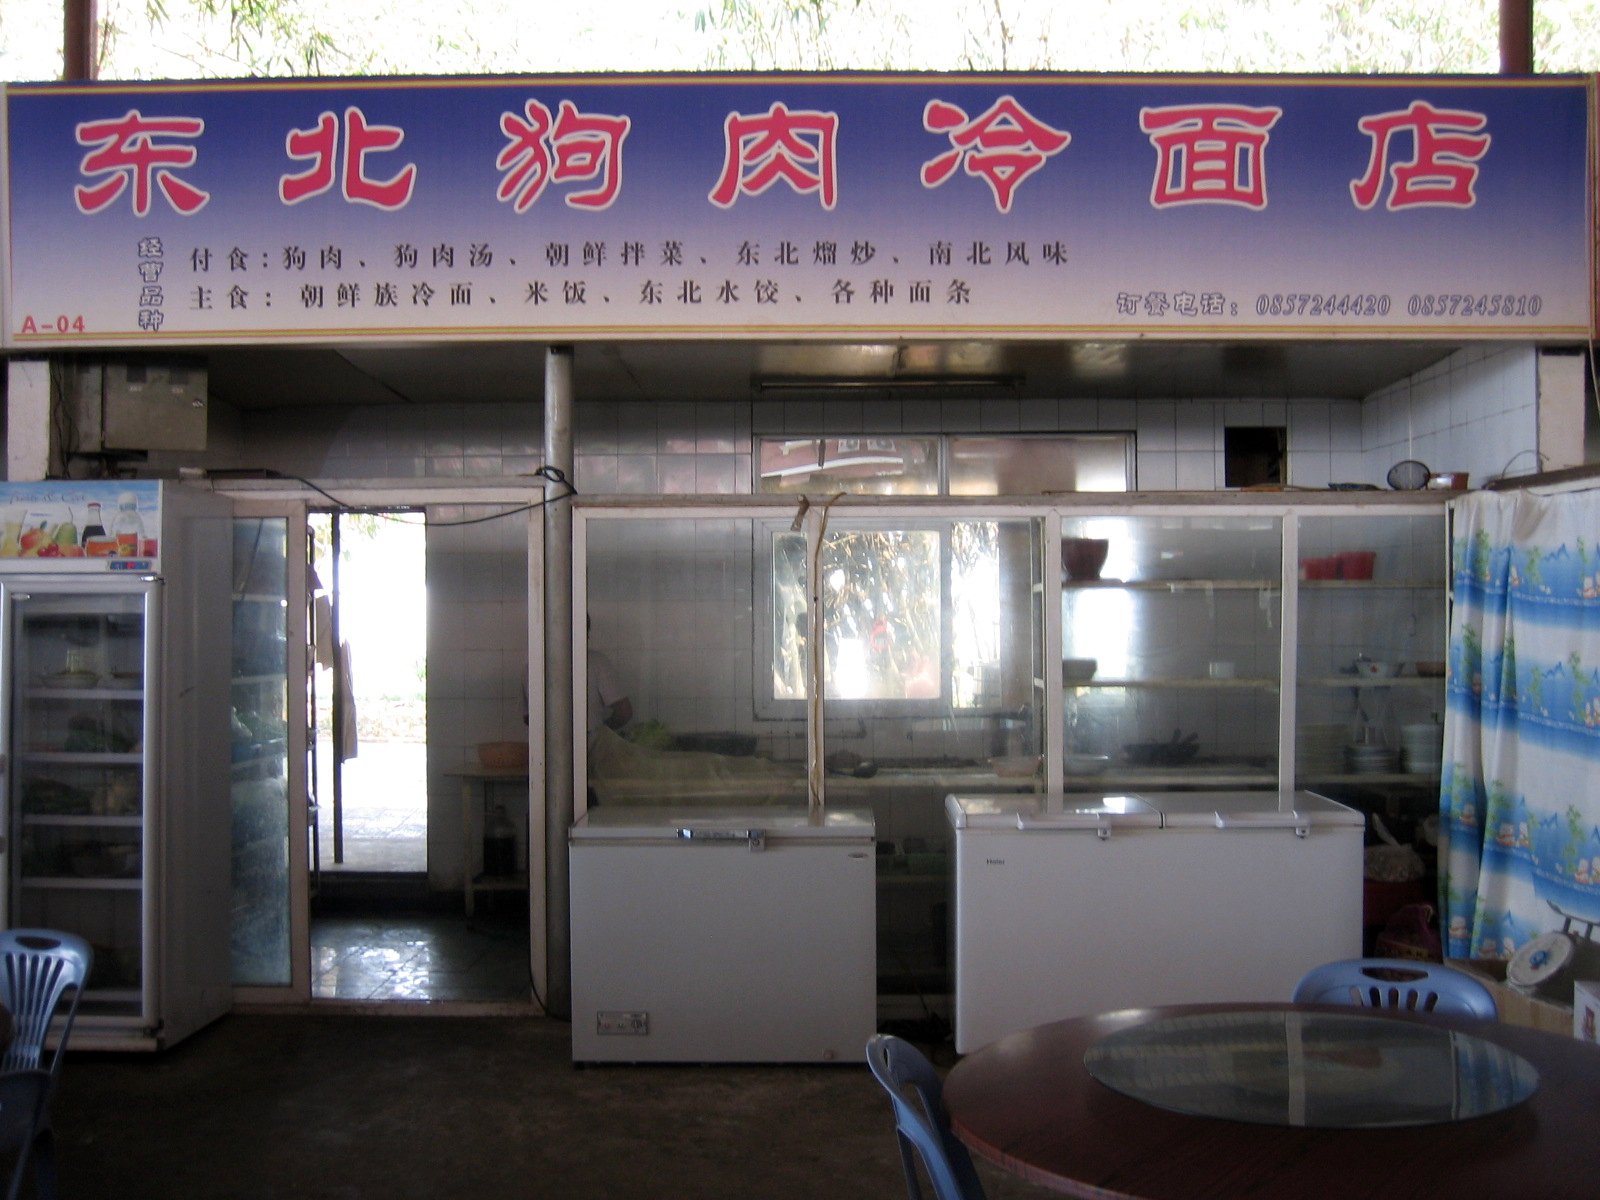 several cabinets in a kitchen with chinese characters on the wall